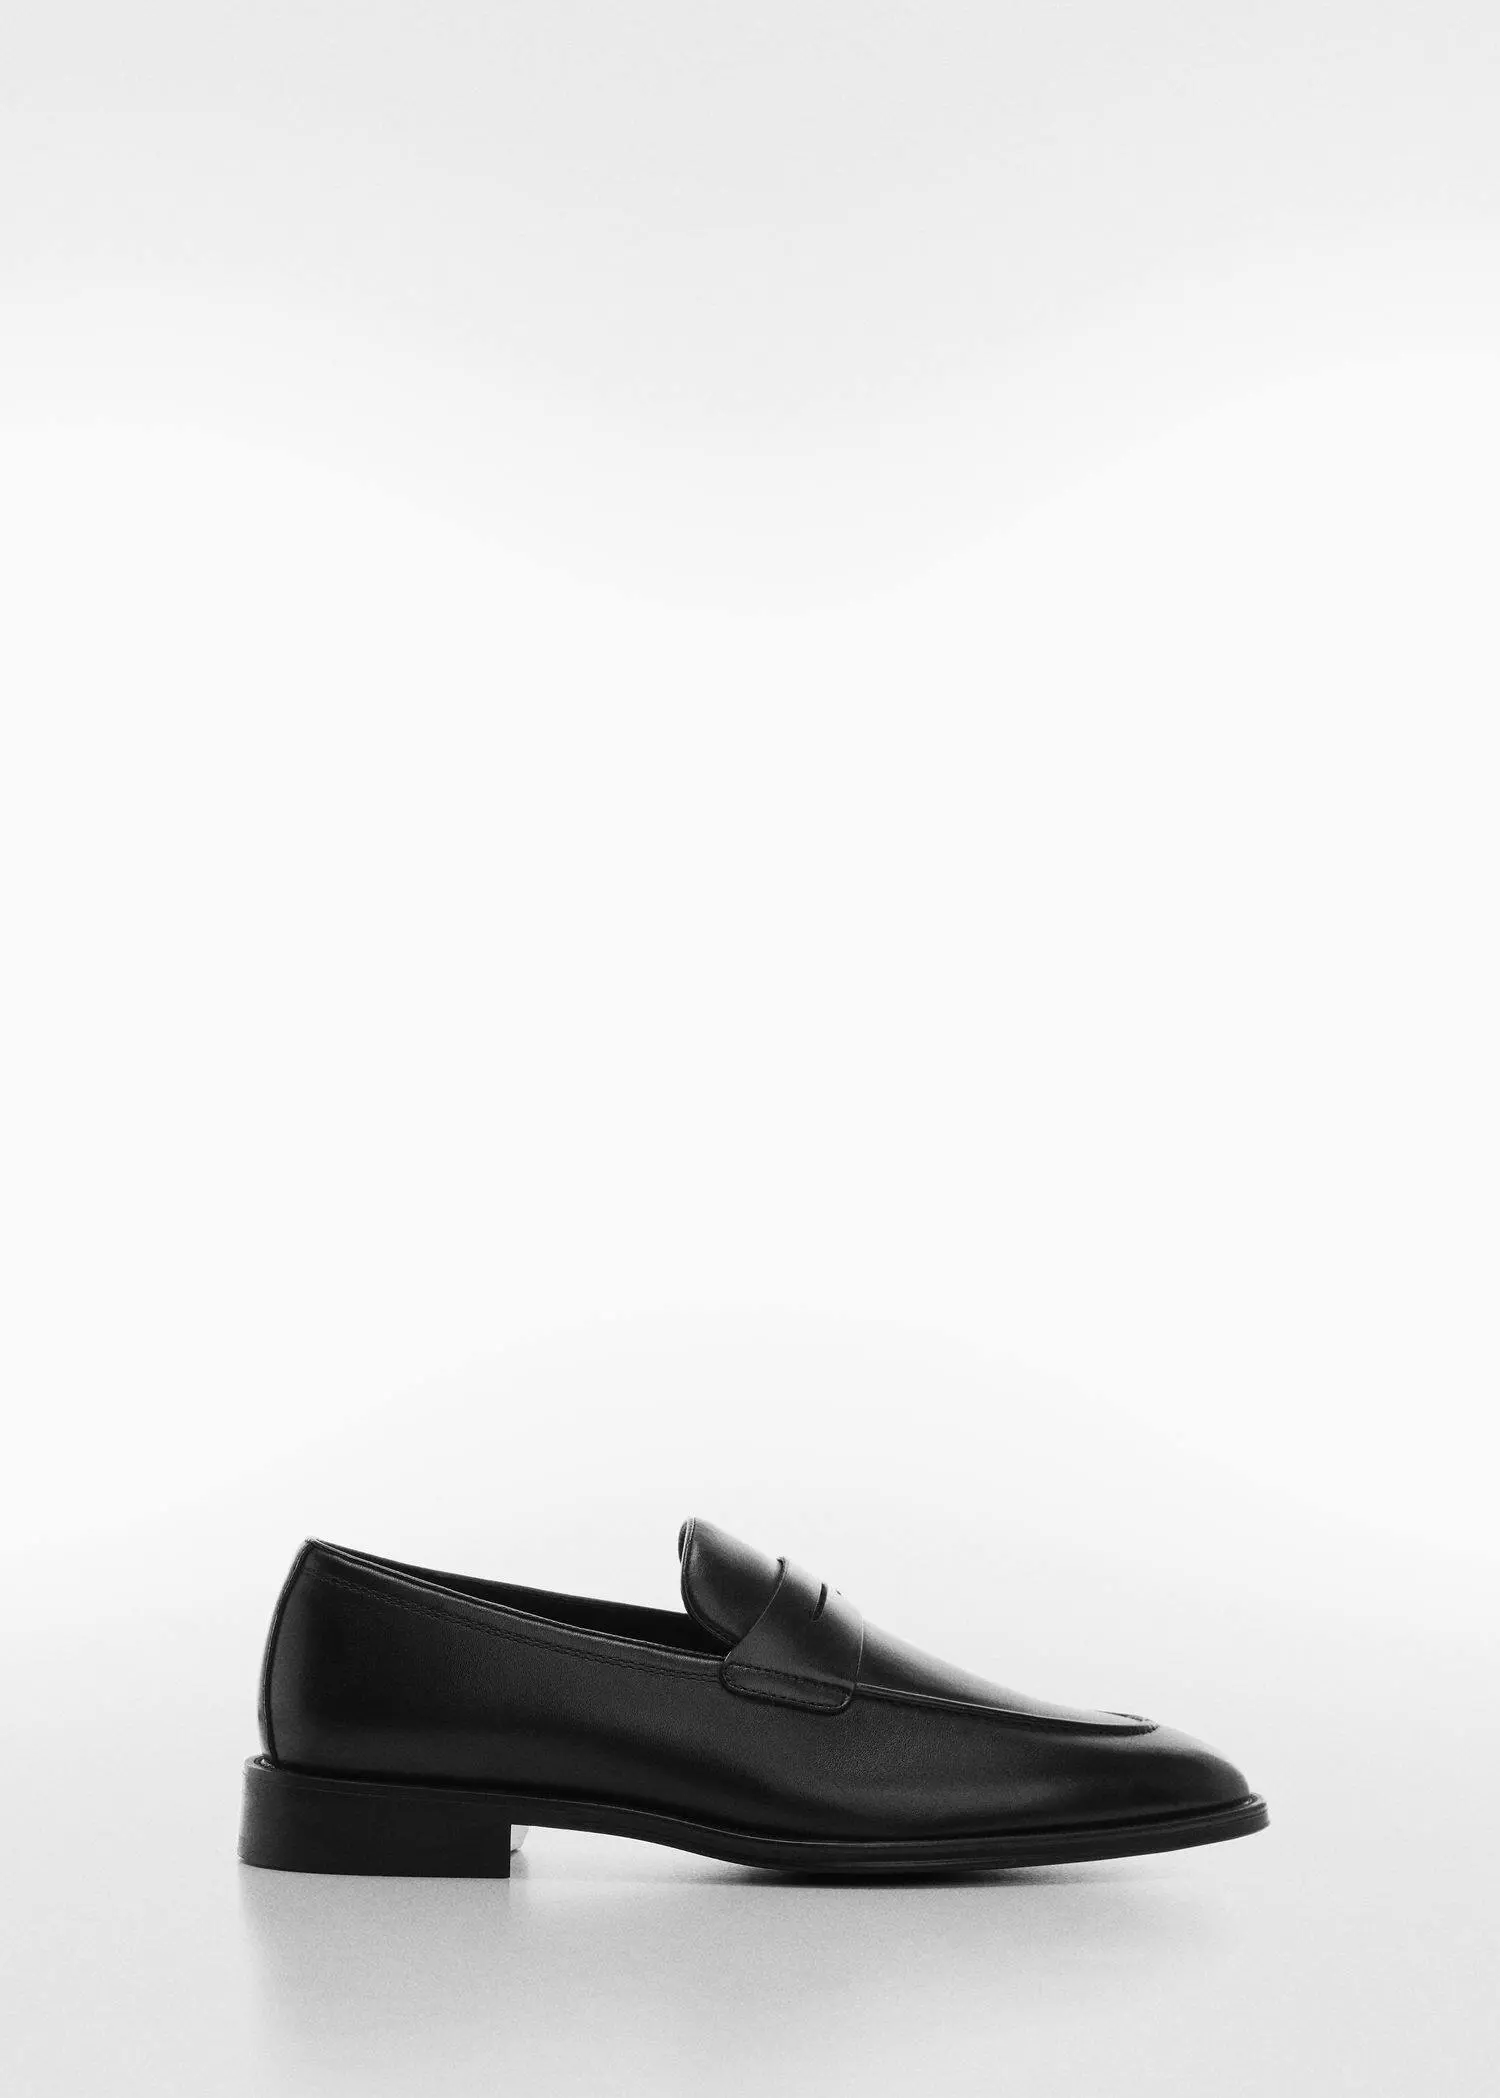 Mango Aged-leather loafers. a pair of black shoes on a white background. 